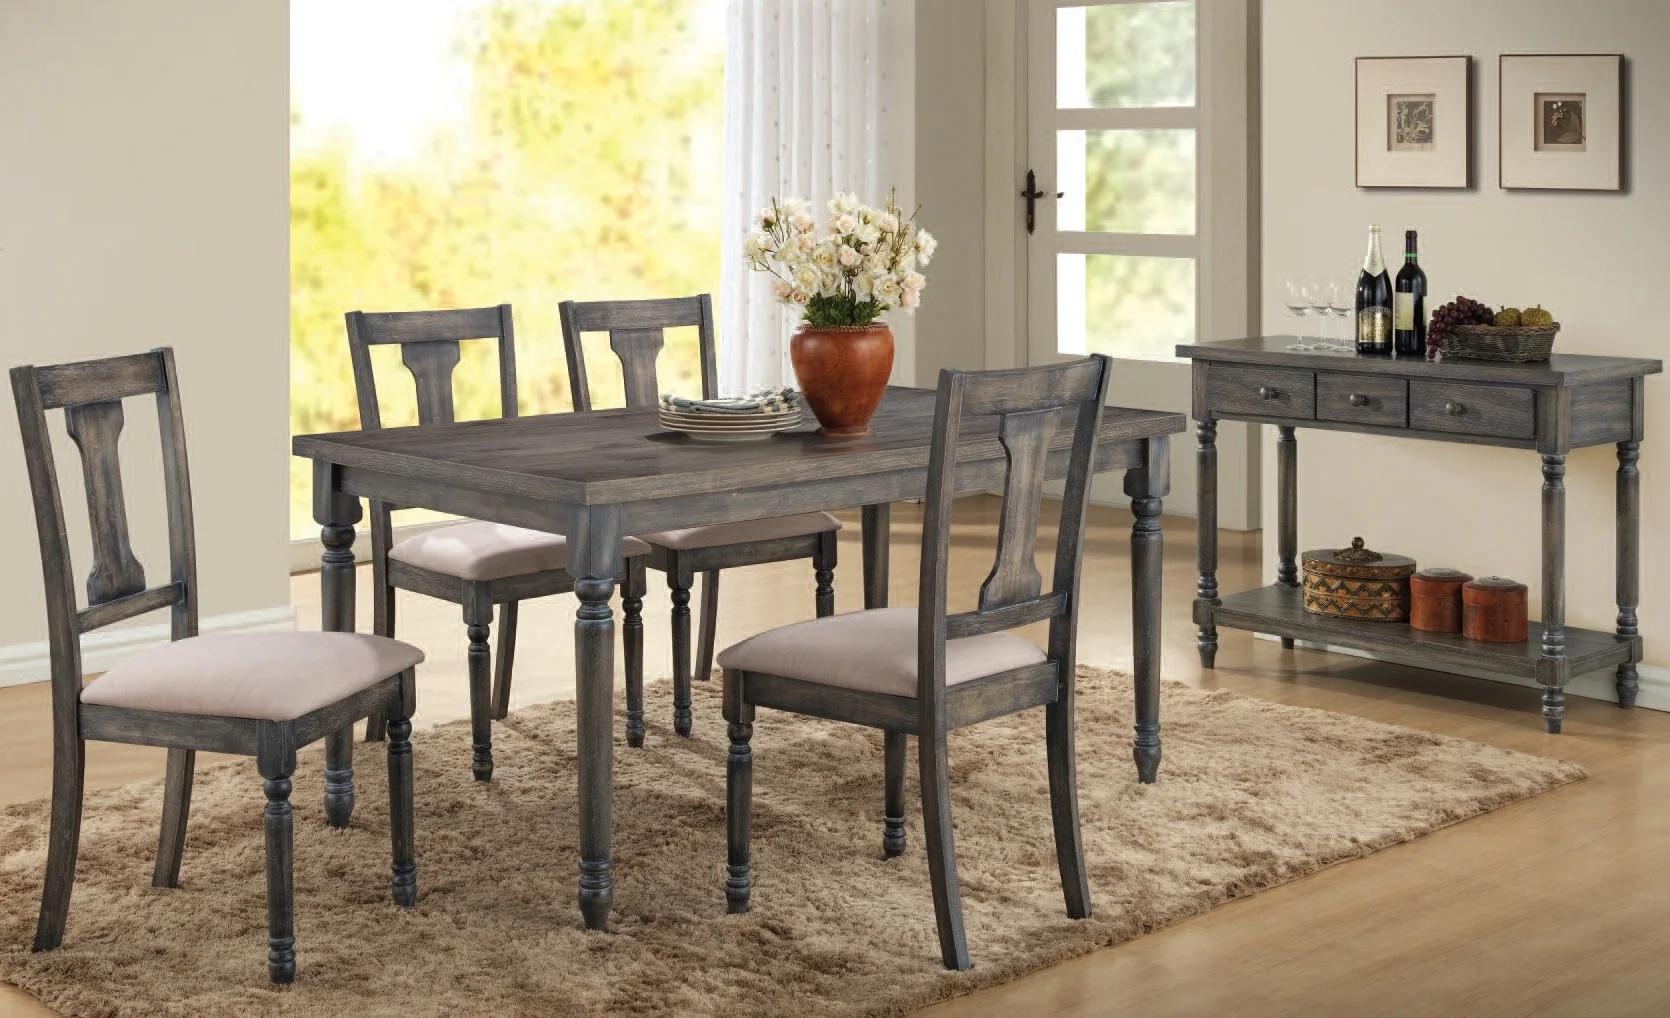 

    
Rustic Weathered Gray Dining Table + 6x Chairs by Acme Wallace 71435-7pcs
